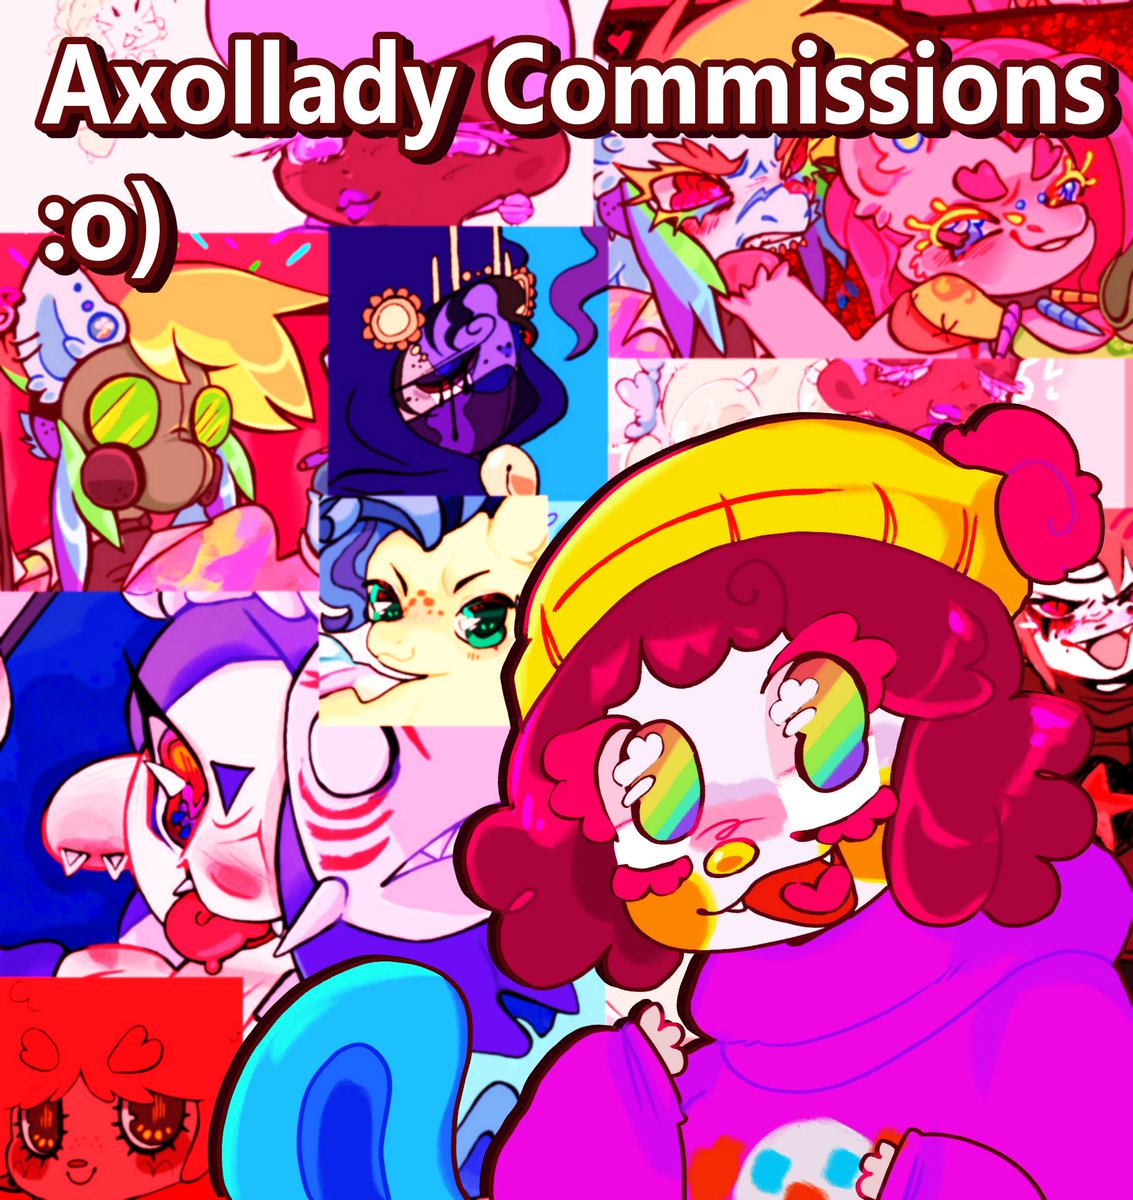 Commission info!! please DM me if you are at all interested! Please make sure to read the TOS listed in this thread before commissioning. 